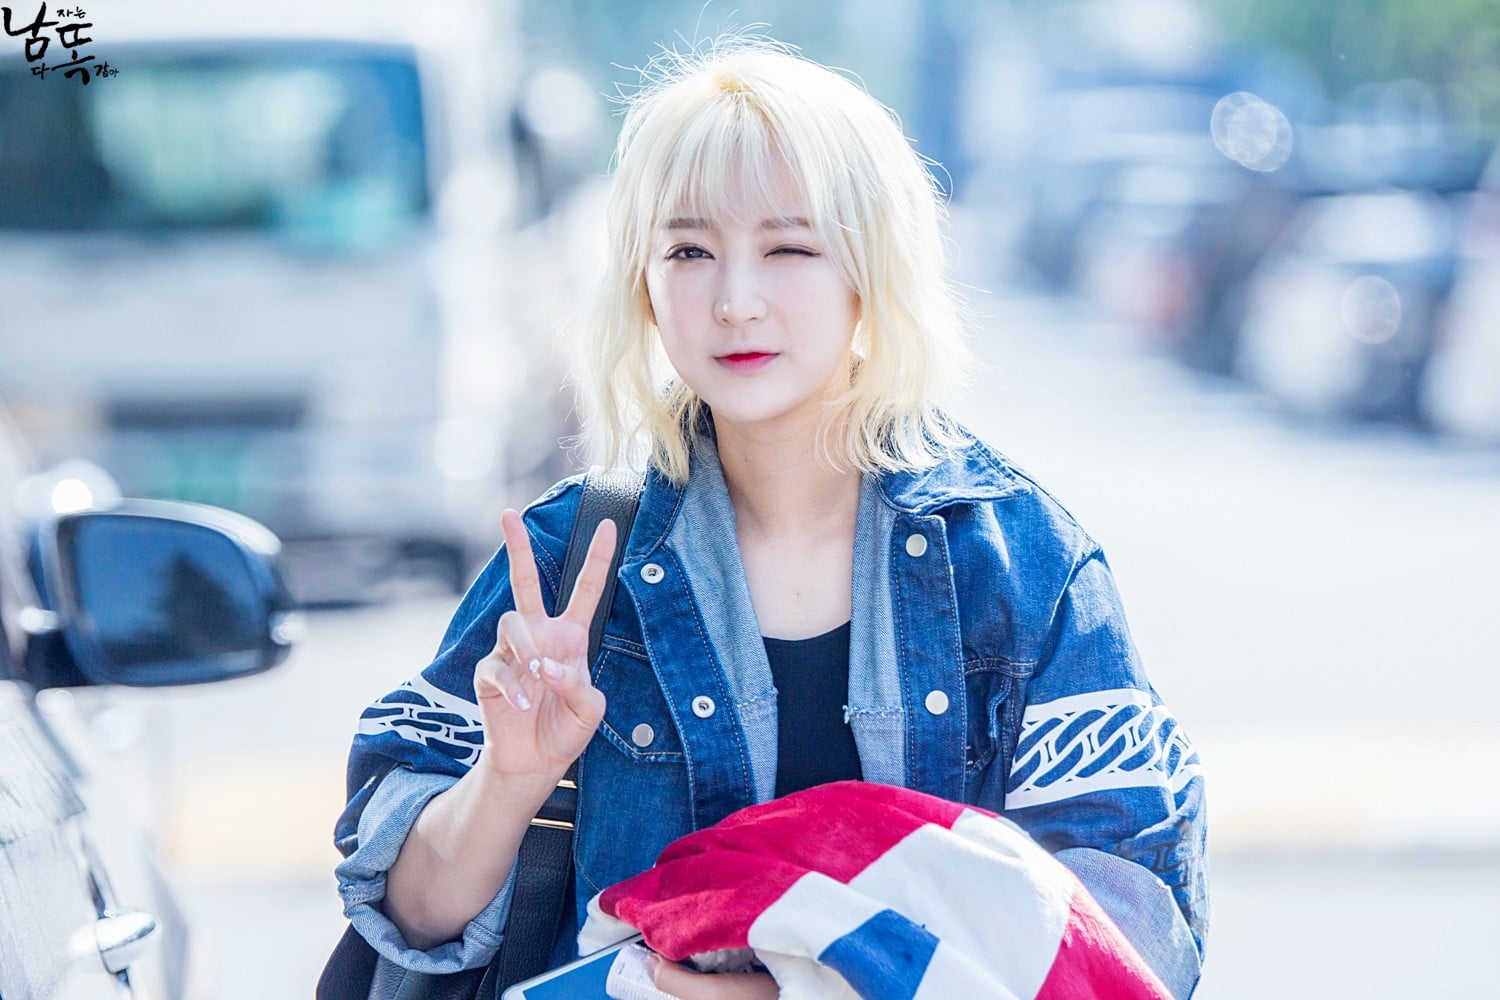 Hyerin, EXID, blond hair, one person, young adult, car, mode of transportation